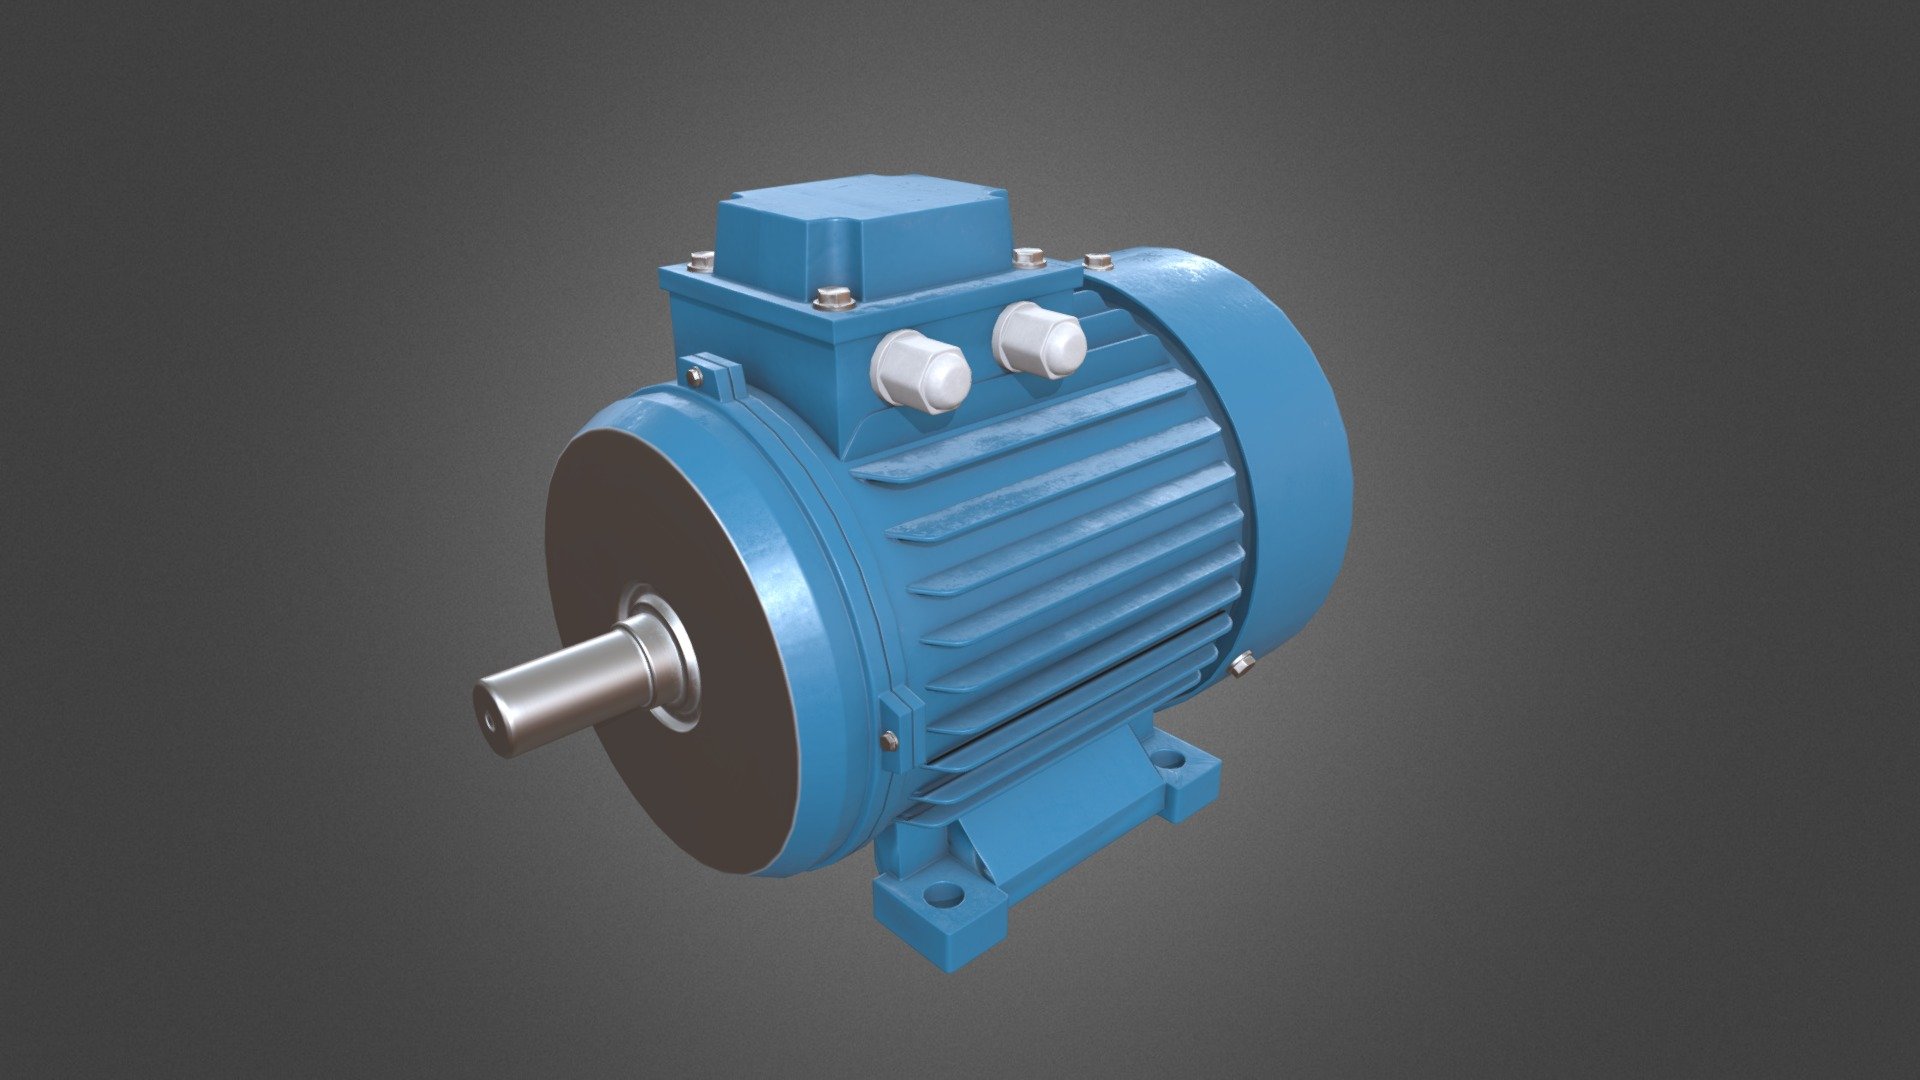 Electric Motor model created in 3DS Max 2018. Textures created in Substance Painter 3d model